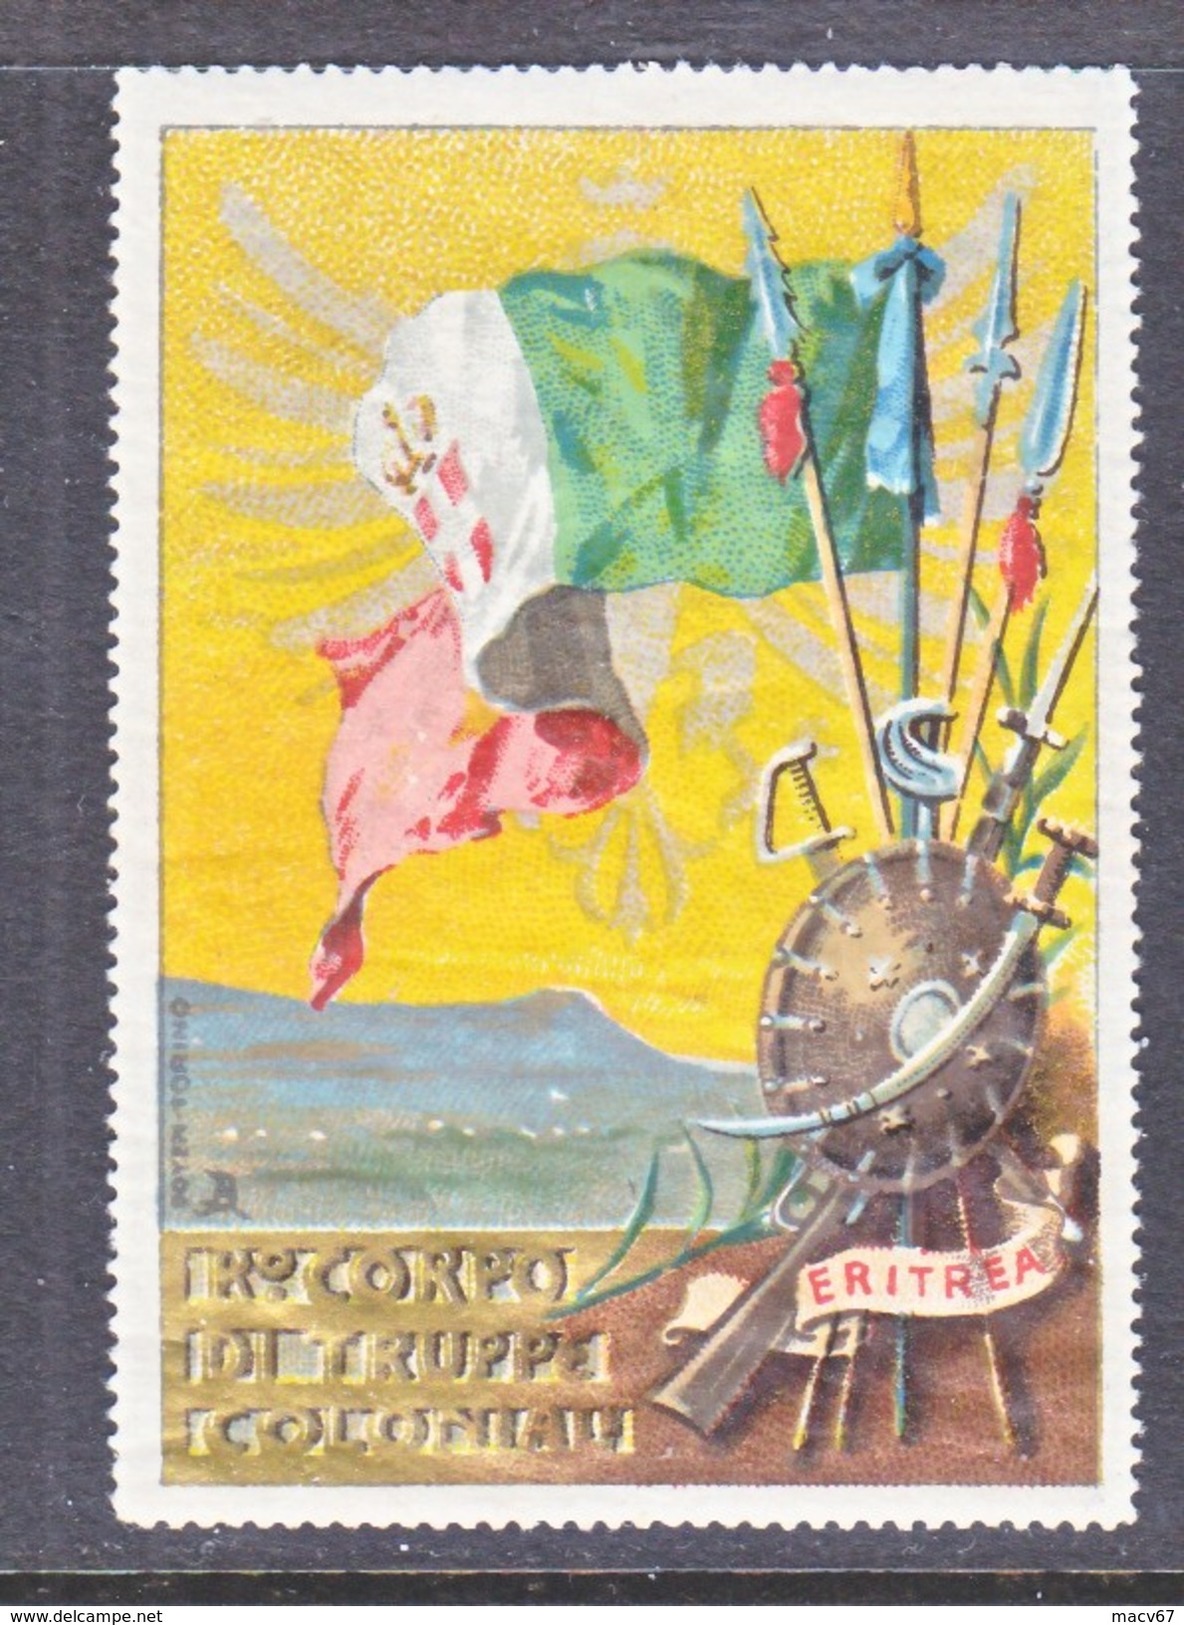 ITALY  ERITREA   POSTER  STAMP  MILITARY   ** - Eritrée